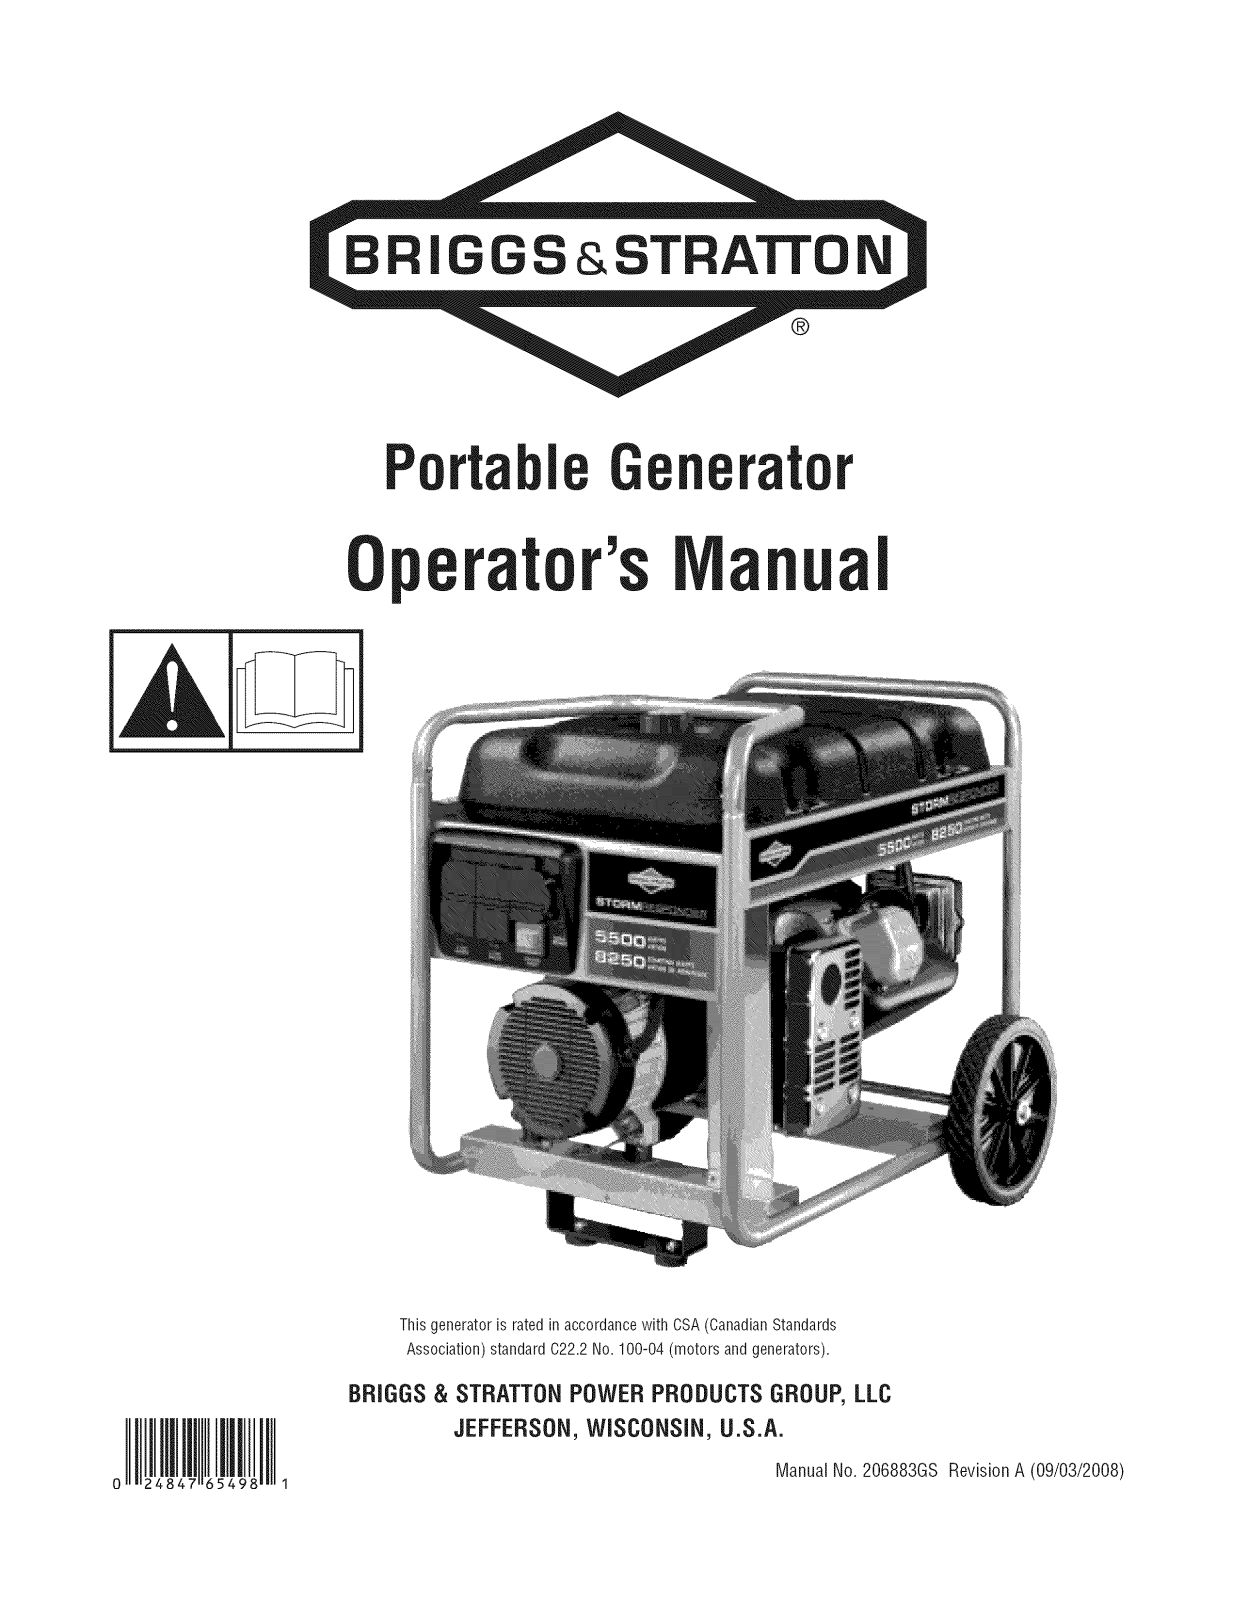 Briggs & Stratton 030430-1, 030430-2, 030430 Owner’s Manual